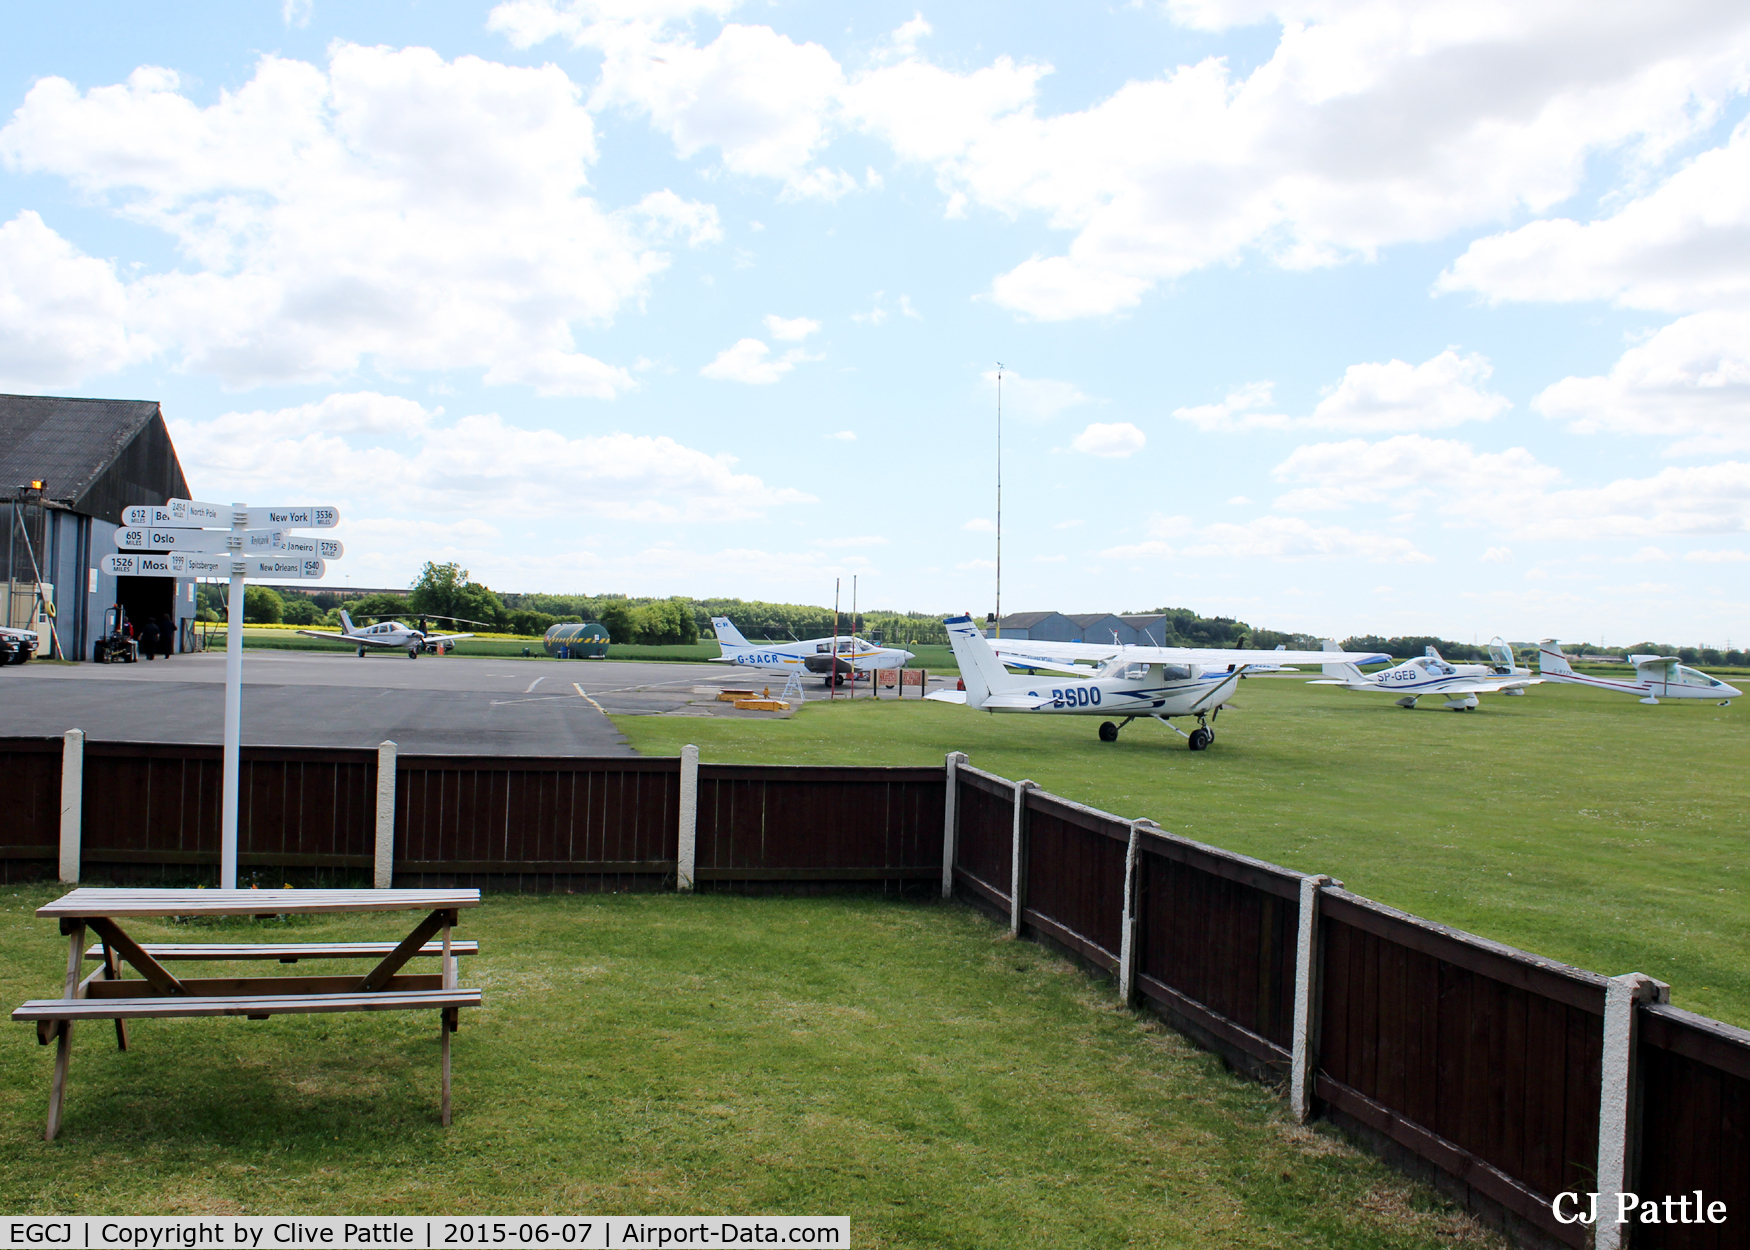 Sherburn-in-Elmet Airfield Airport, Sherburn-in-Elmet, England United Kingdom (EGCJ) - Looking across the apron from the clubhouse of Sherburn Aero Club. The staff are very welcoming and the food is de-lish. If you ask nicely and have a Hi-Vis jacket you may get airside and hangar access.